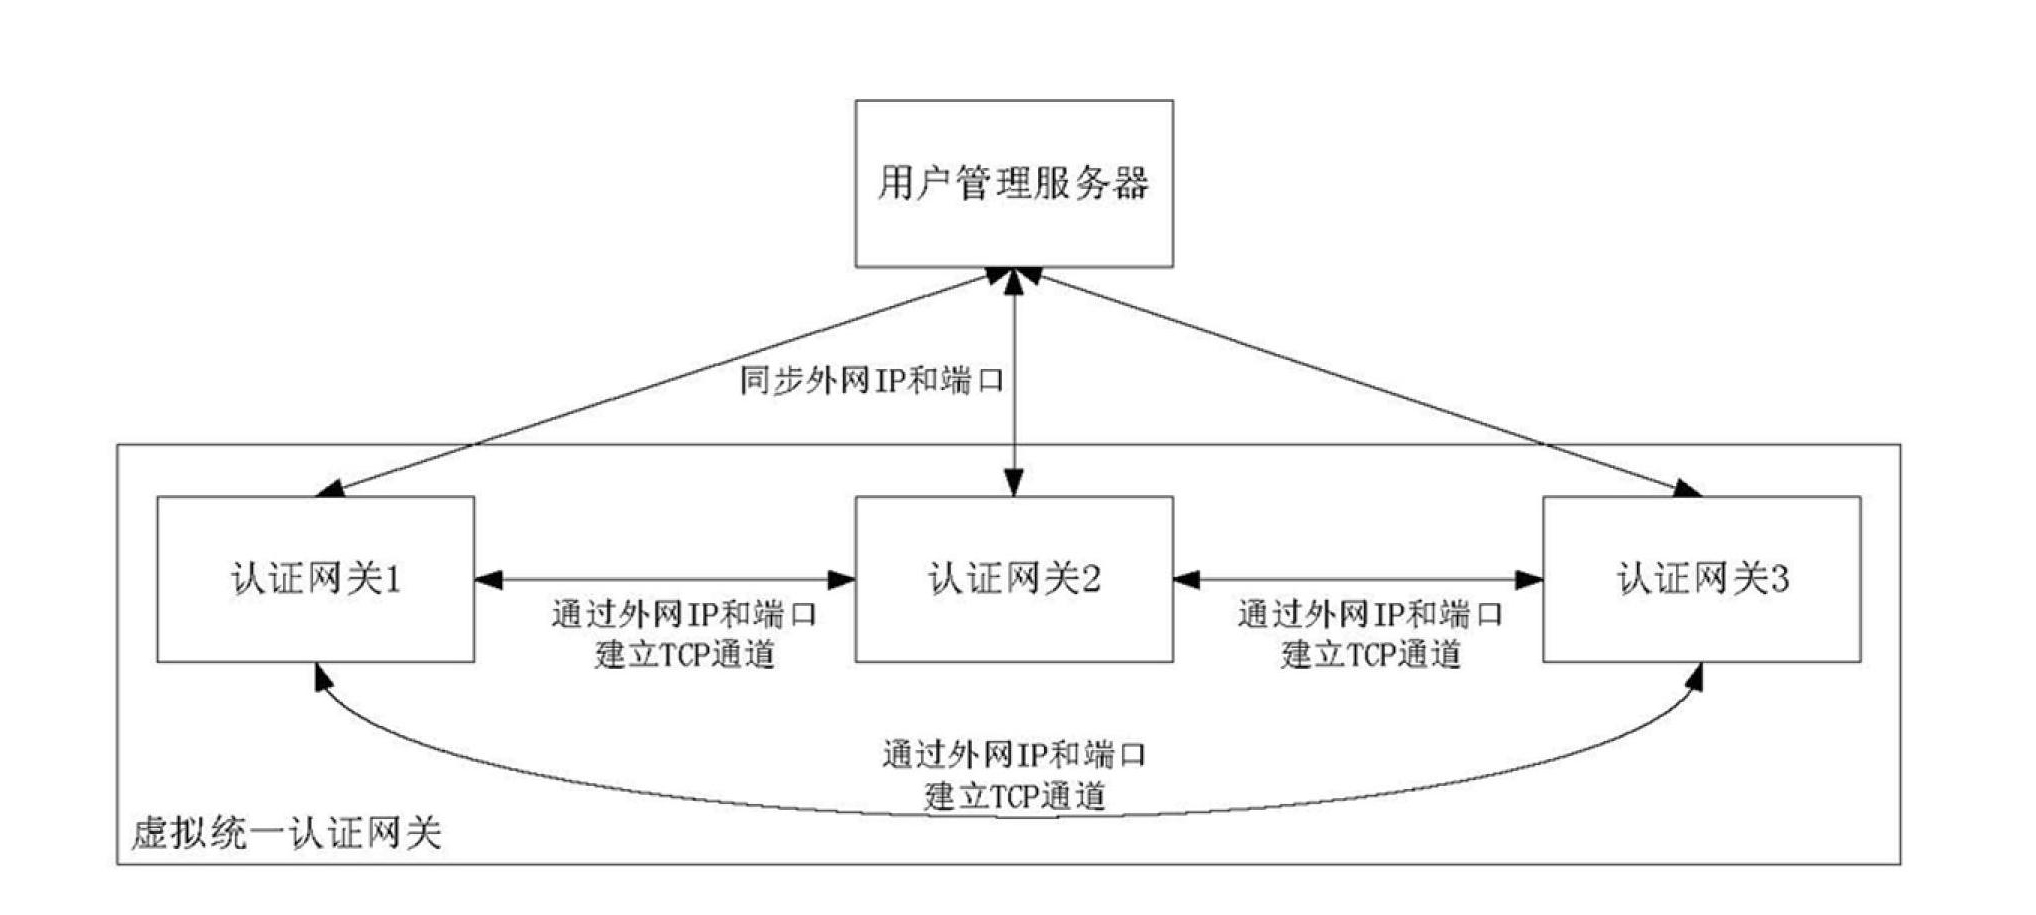 User authentication method for extensible and distributed wireless local area network (WLAN)